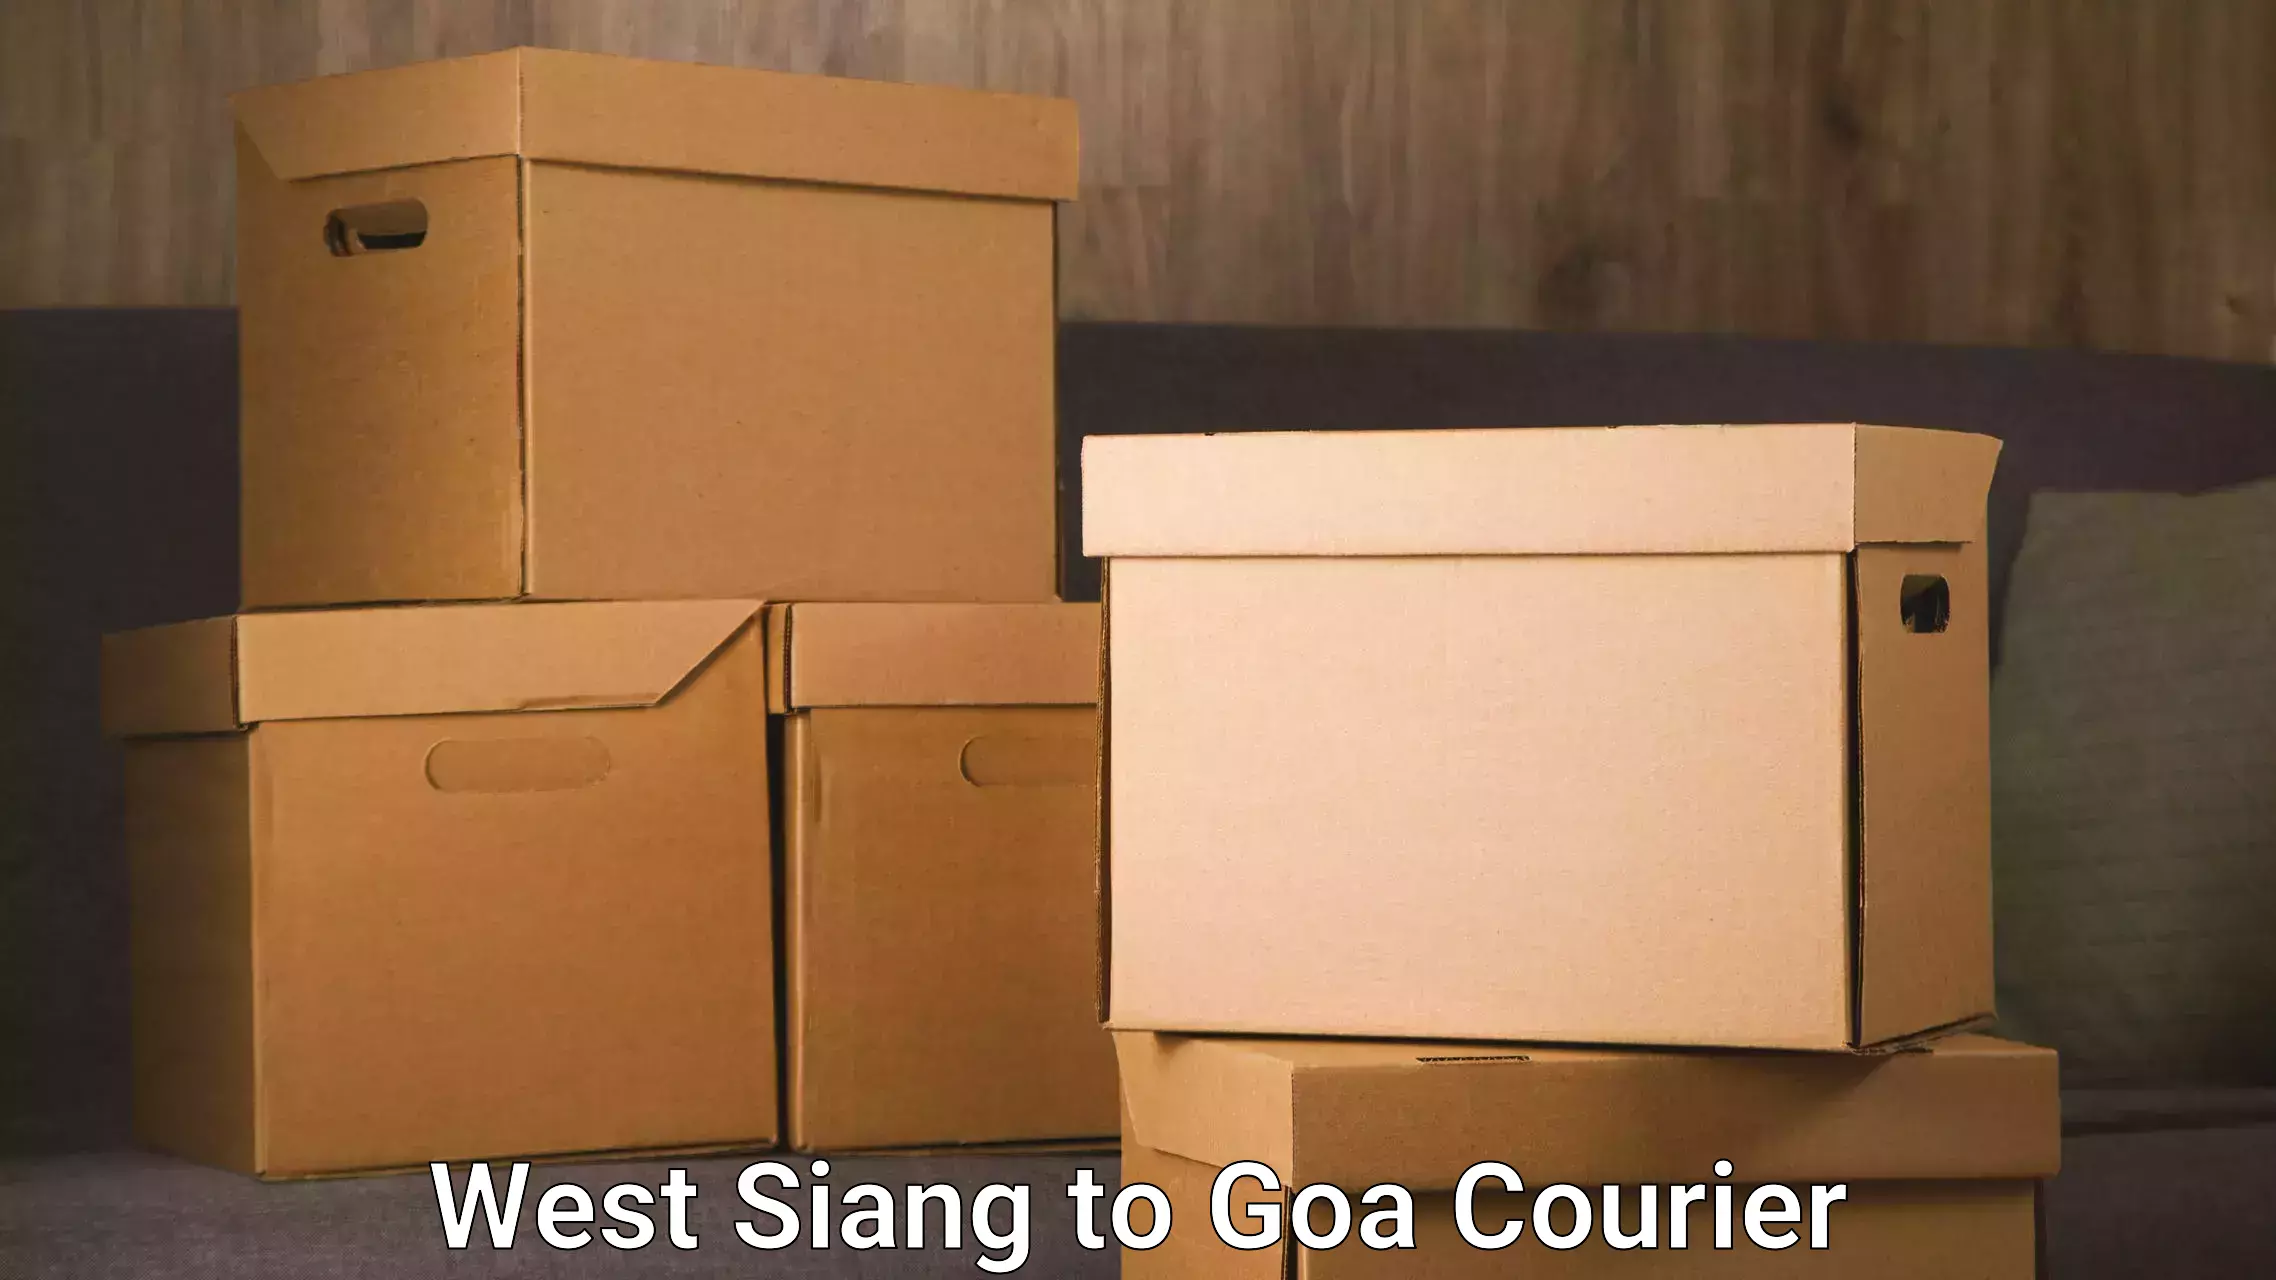 Reliable logistics providers West Siang to Goa